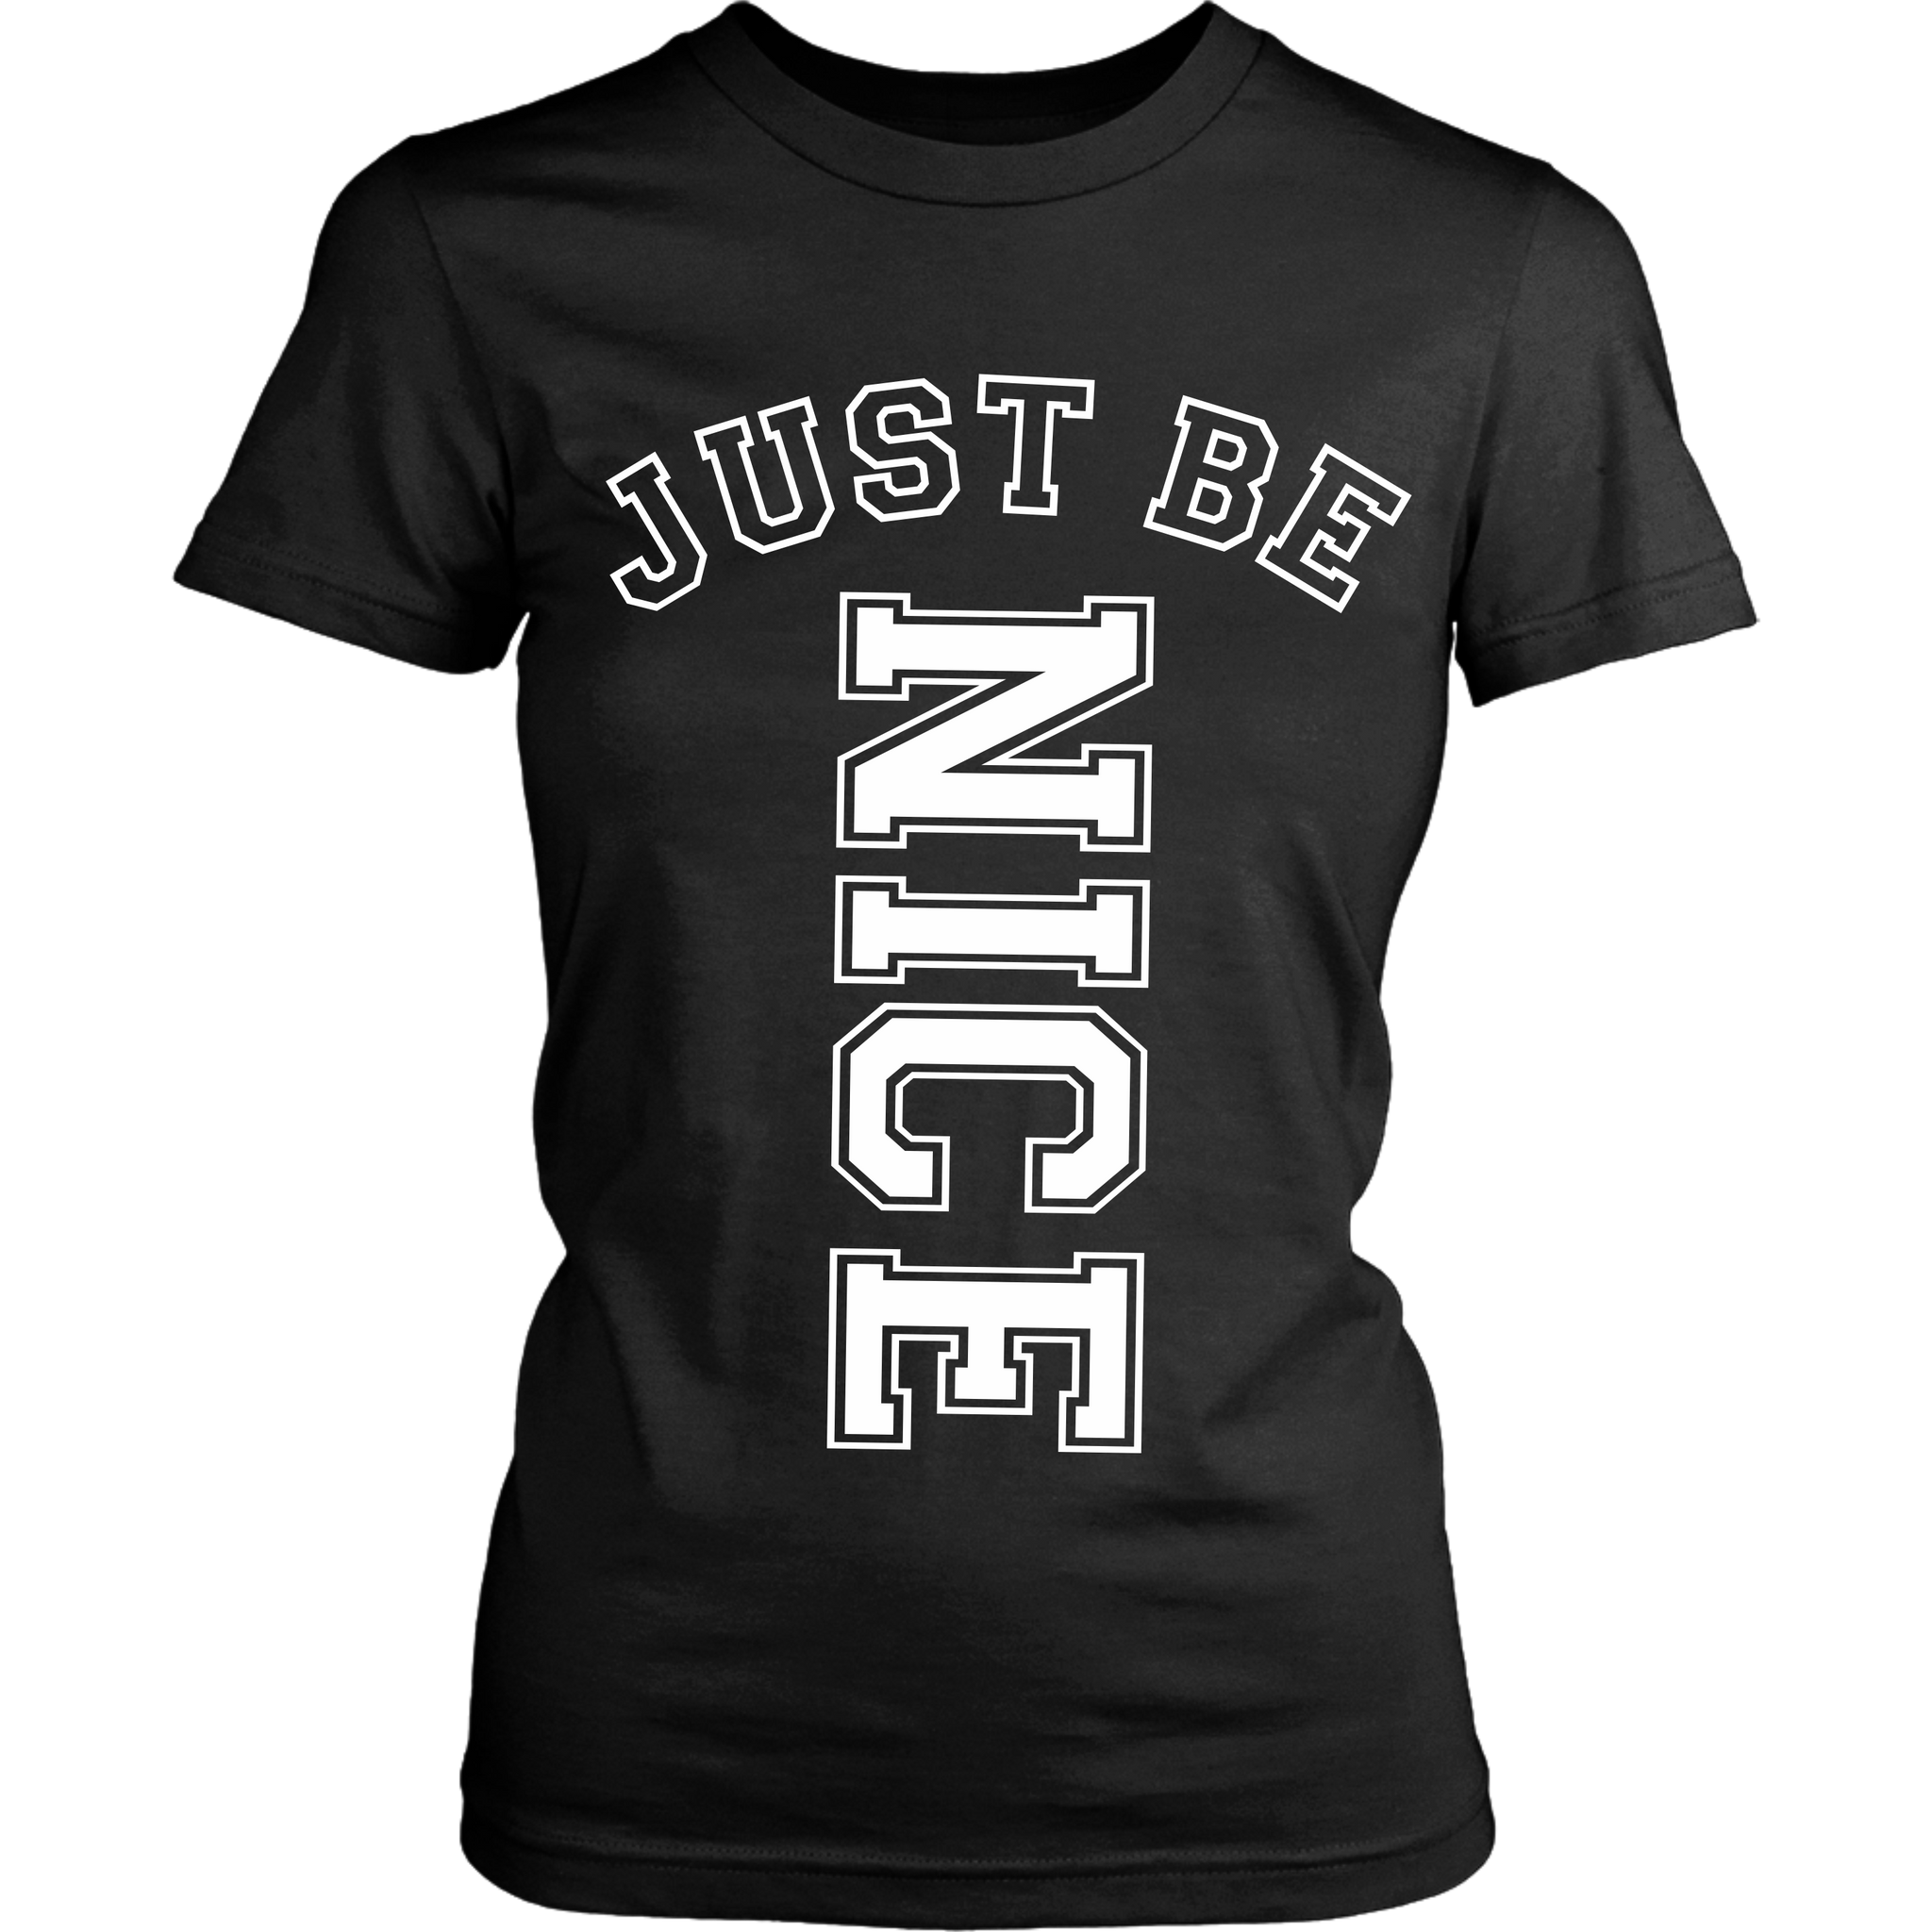 JUST BE NICE - Get this *EXCLUSIVE NEW RELEASE* - xpertapparel